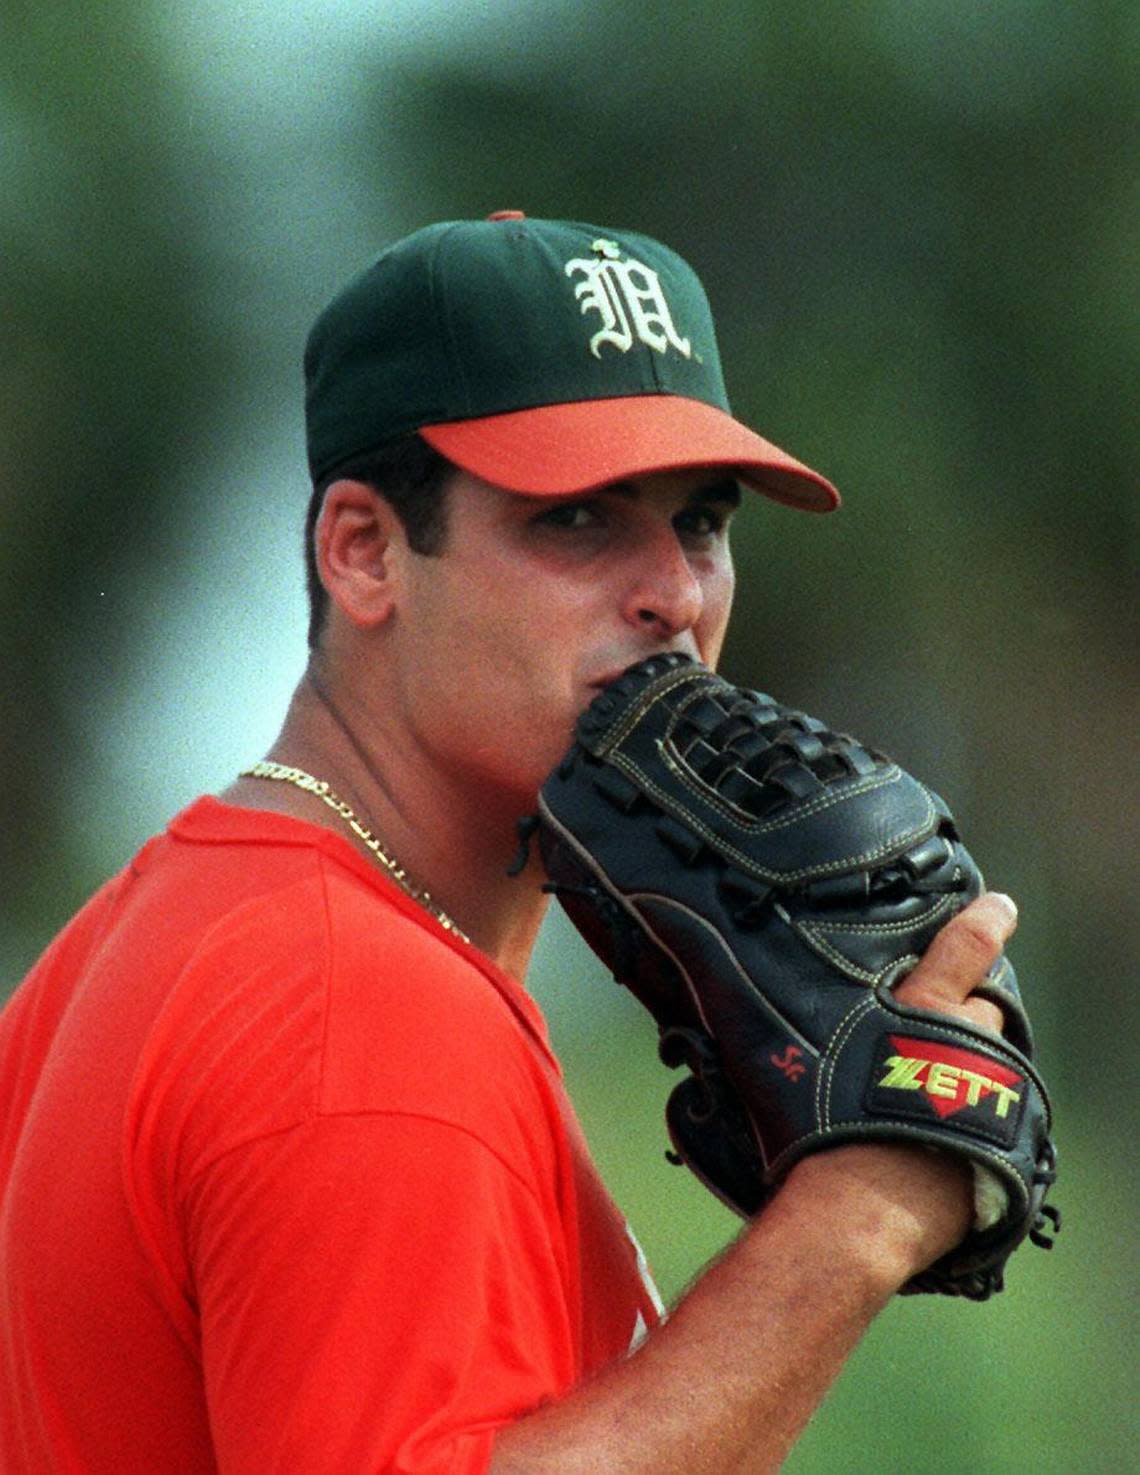 J.D. Arteaga takes a stare from the mound during practice at Mark Light as they prepare for the College World Series in Omaha. Photo by C.W. GRIFFIN-HERALD STAFF-5/28/97 C.W. GRIFFIN/HERALD STAFF